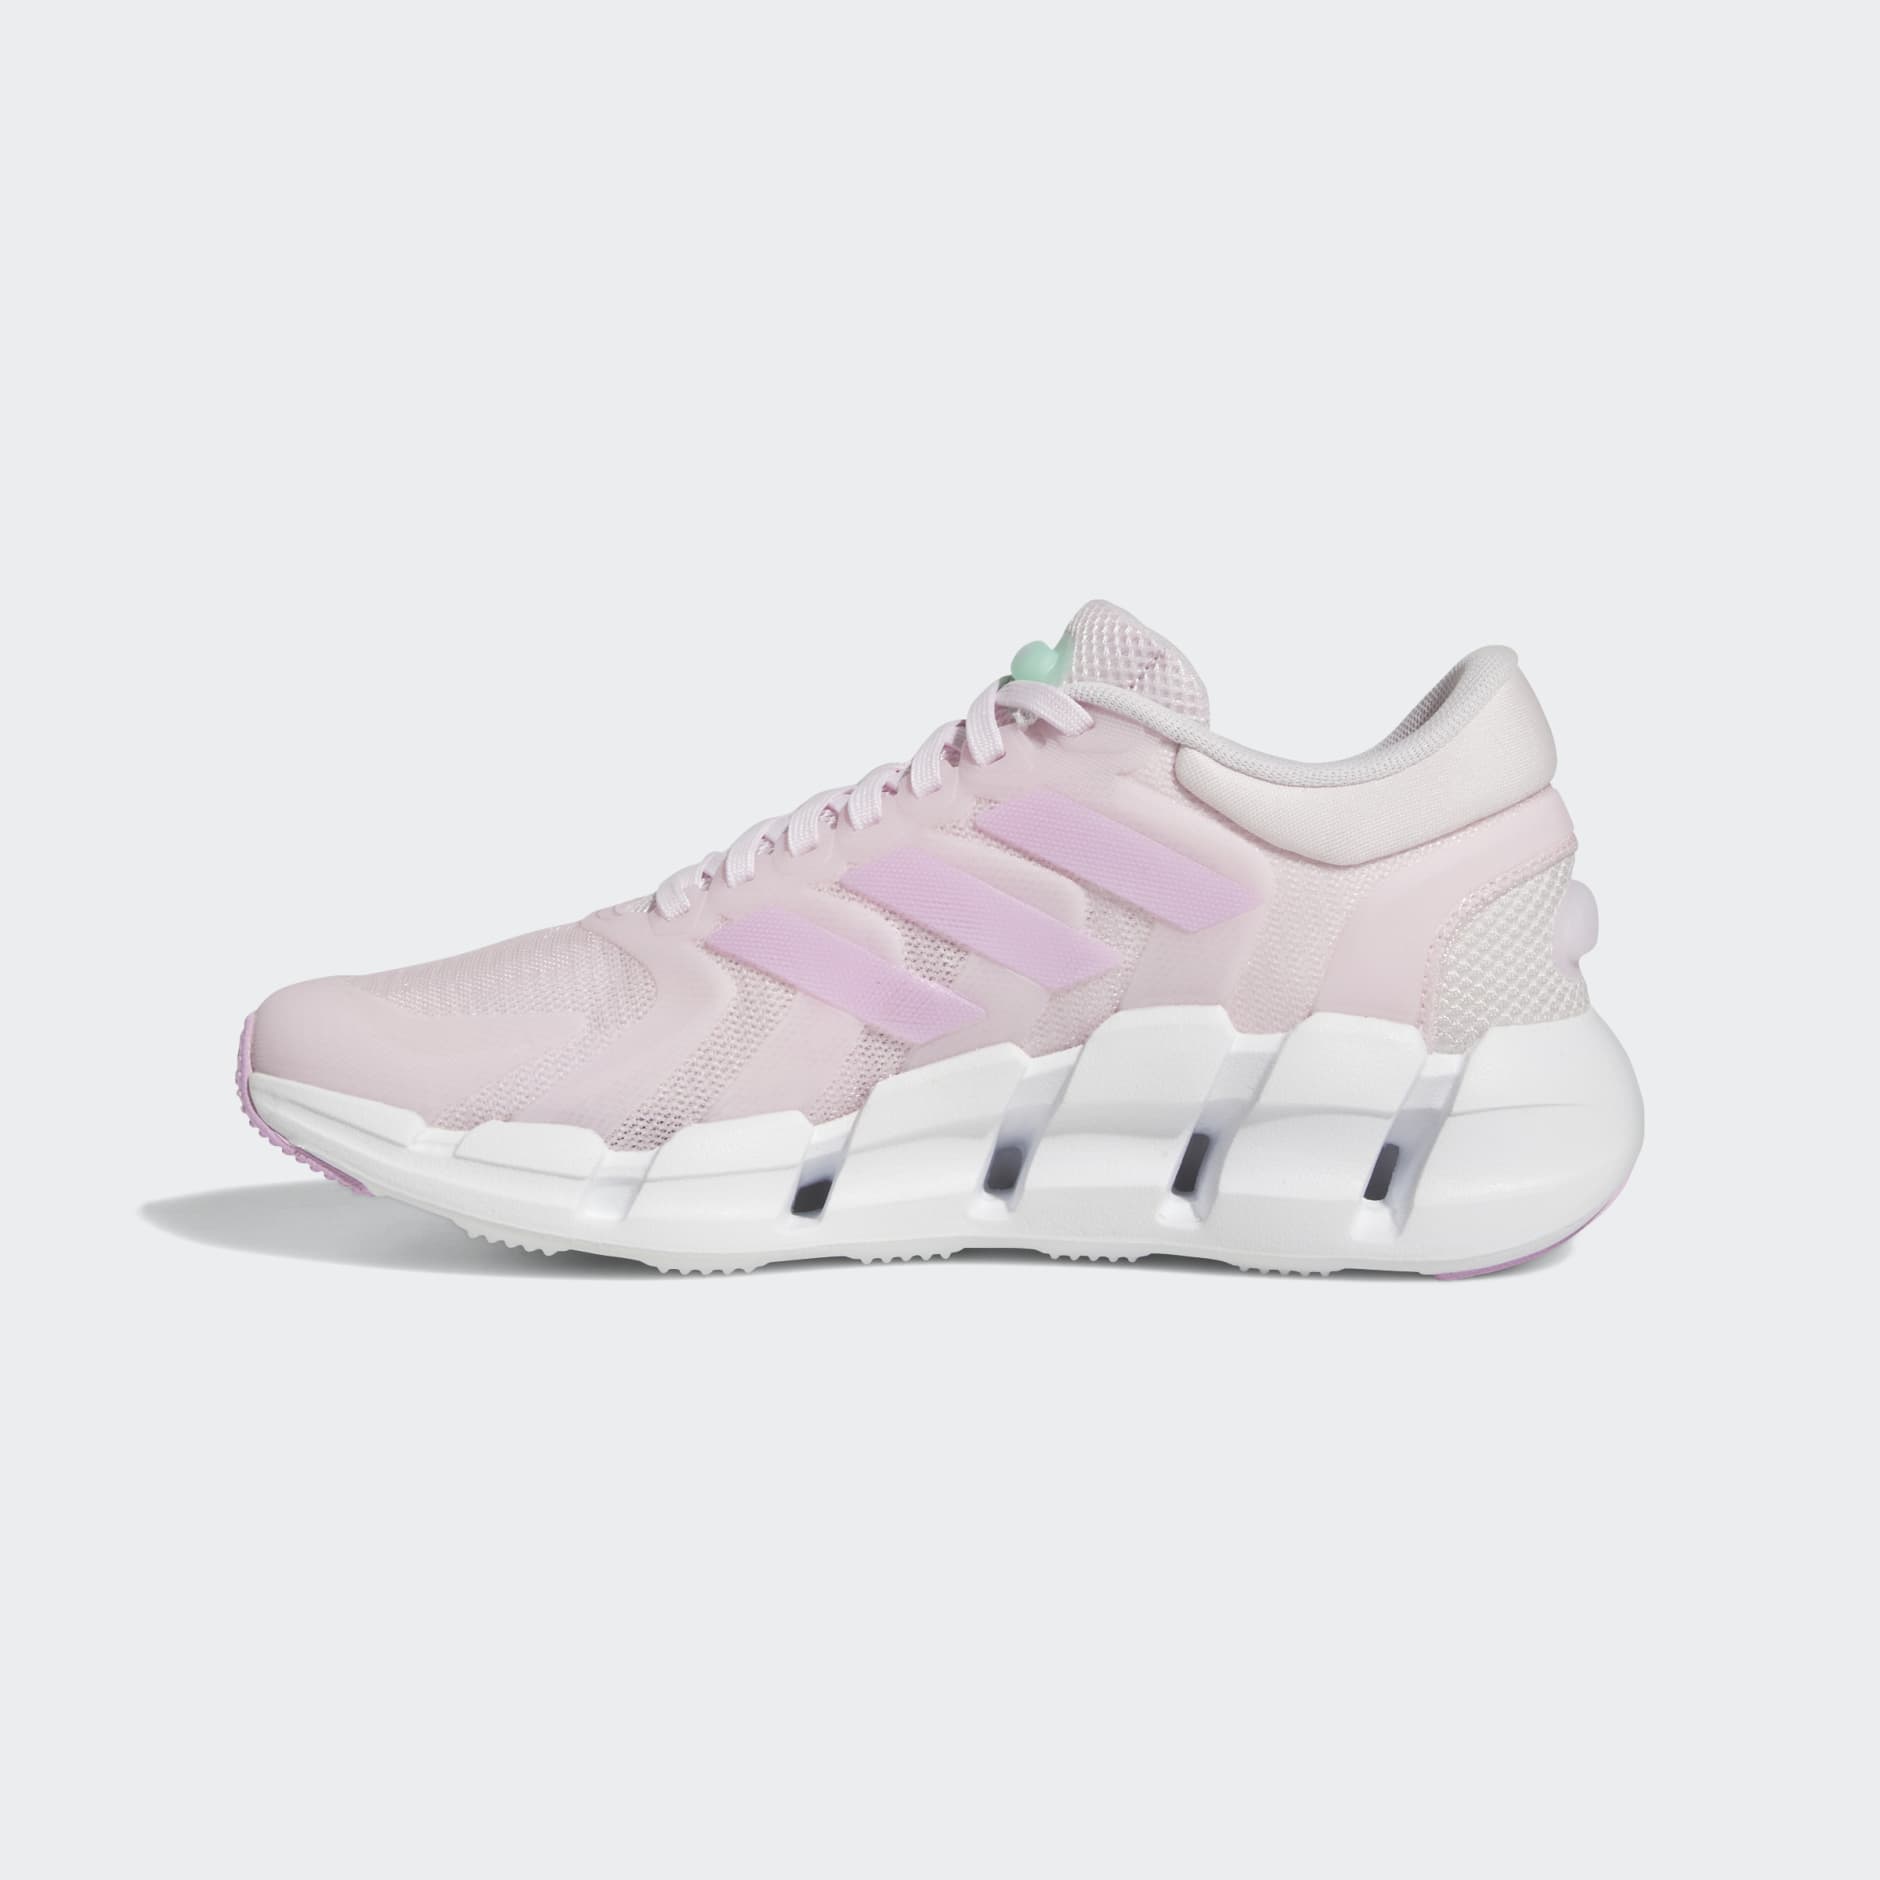 Women's Shoes - Ventice Climacool - | adidas